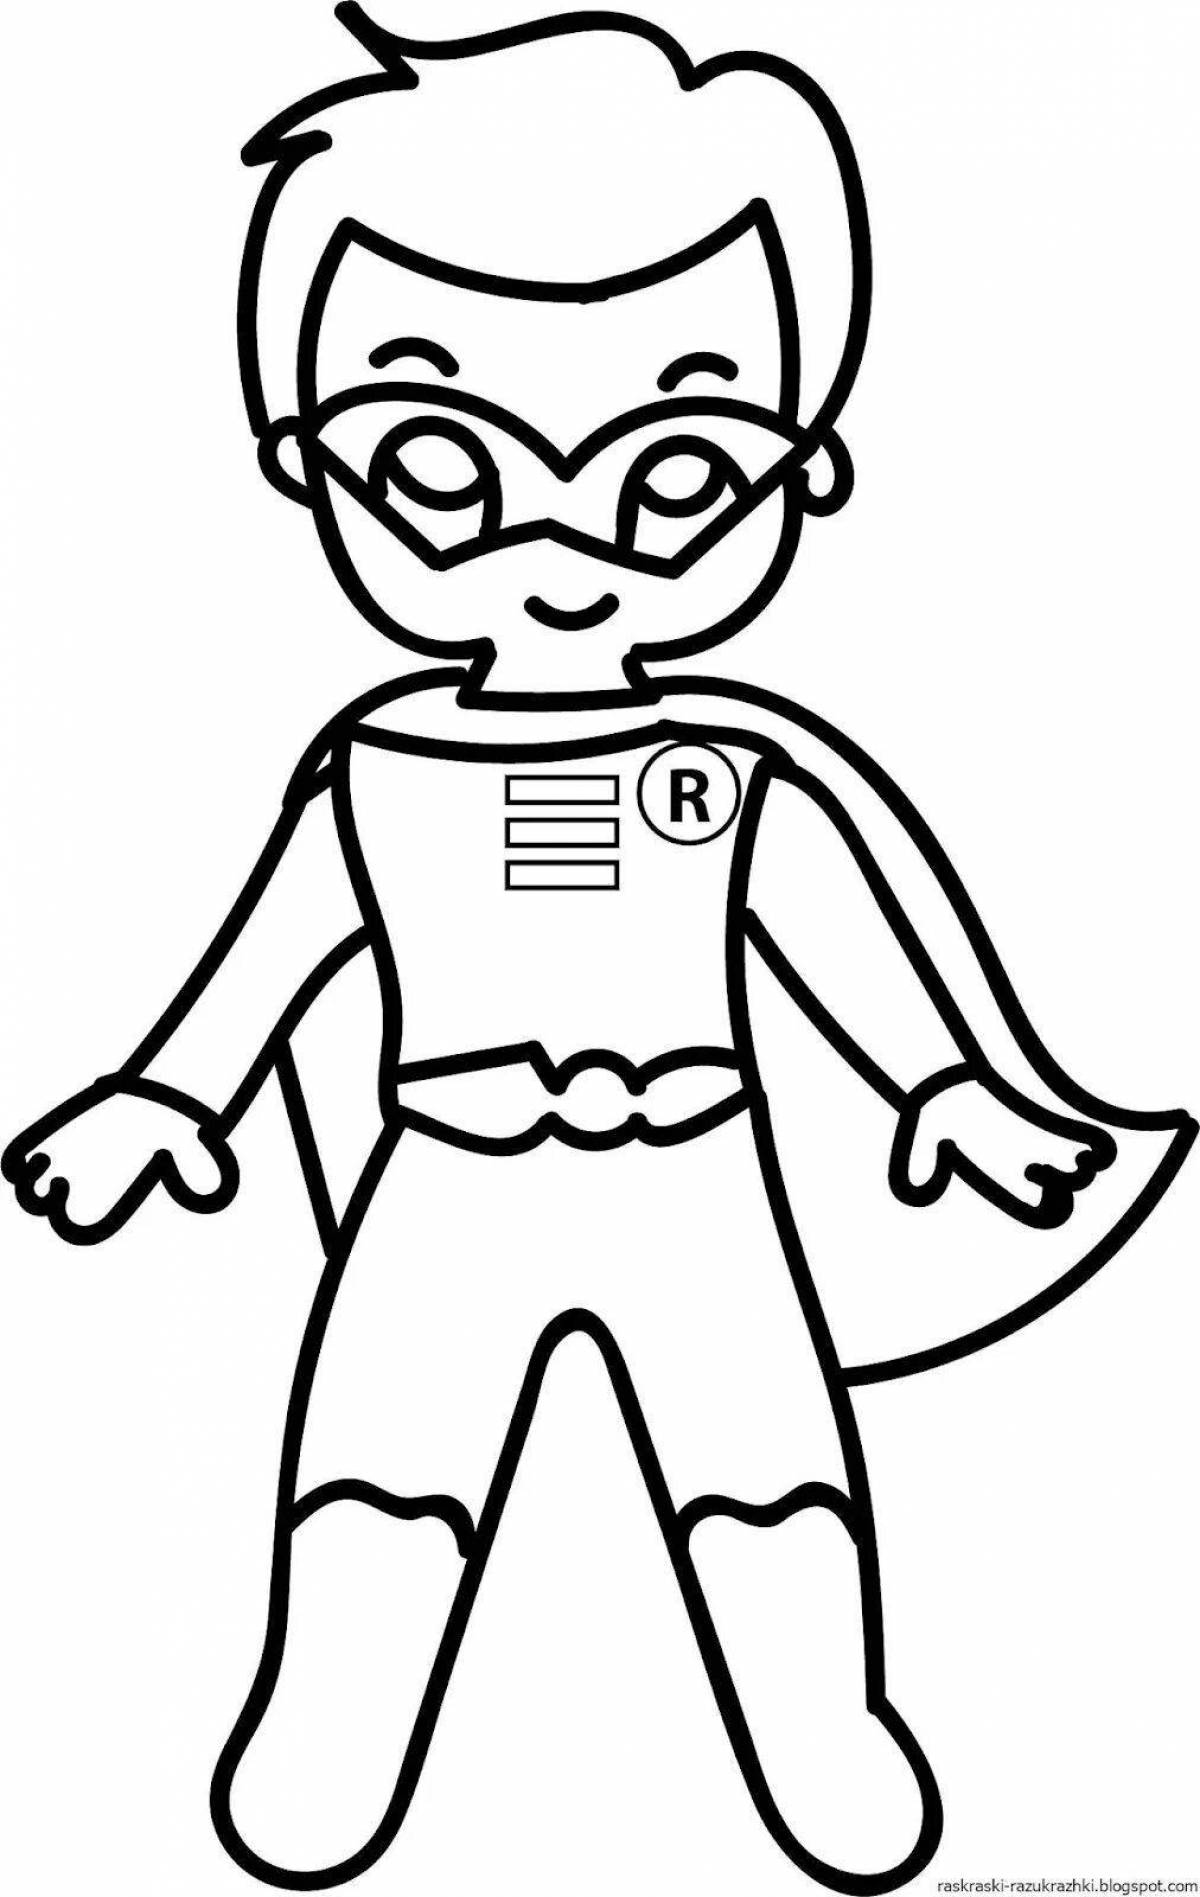 Playful coloring book superheroes small